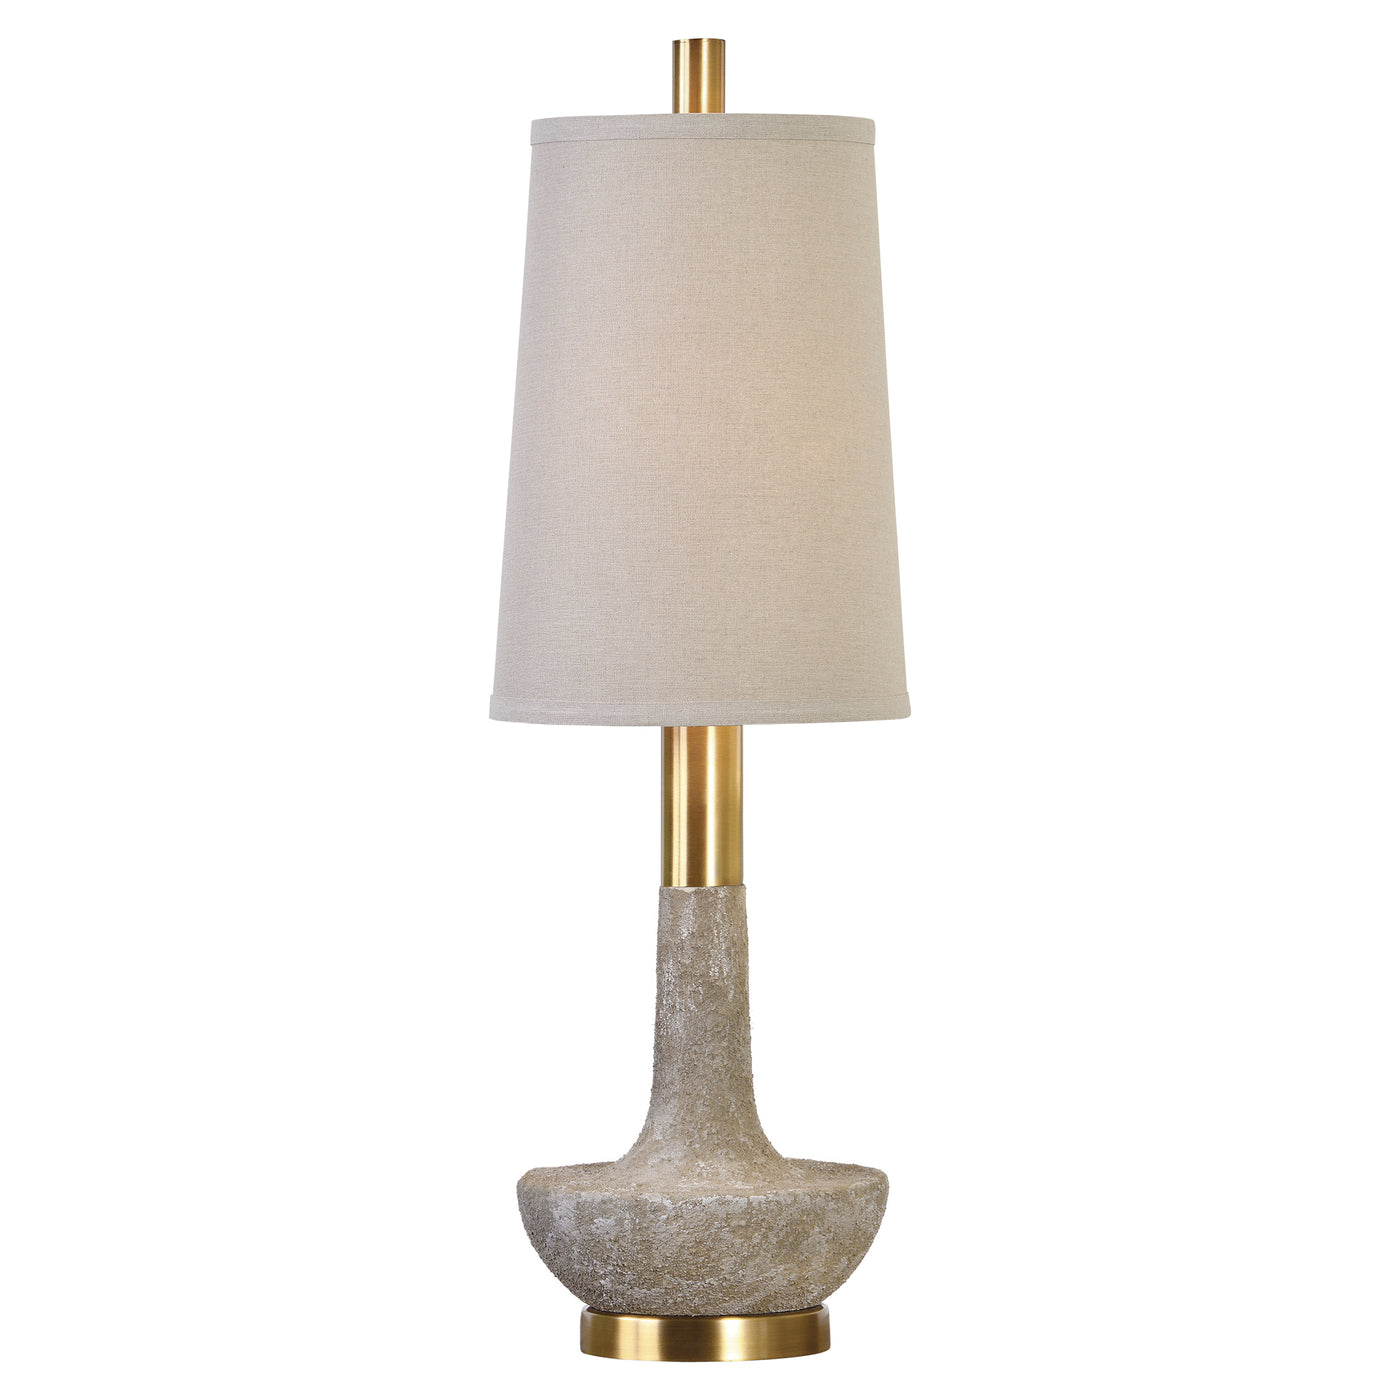 Textured Stone Ivory Finish, Accented With Plated Brushed Brass Details. The Tapered Round Hardback Shade Is An Oatmeal Li...